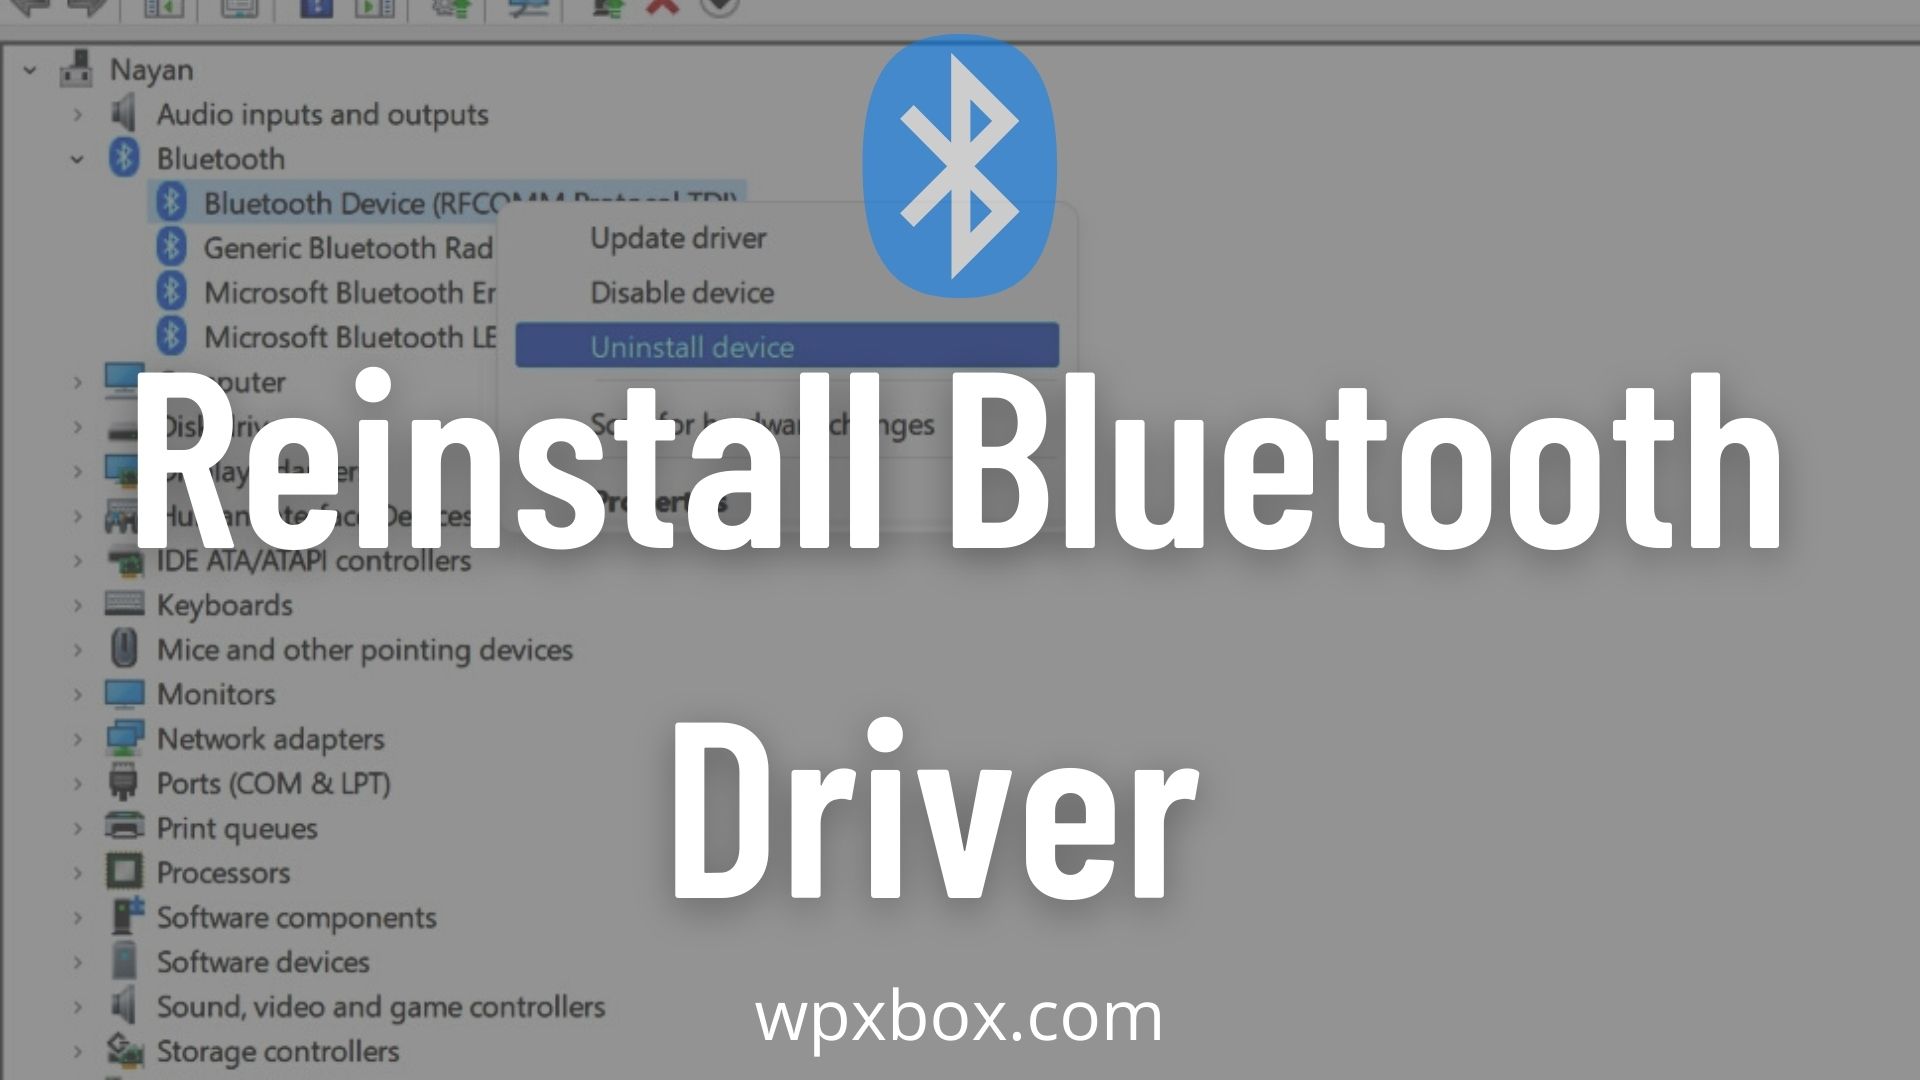 asus bluetooth driver windows 11 download